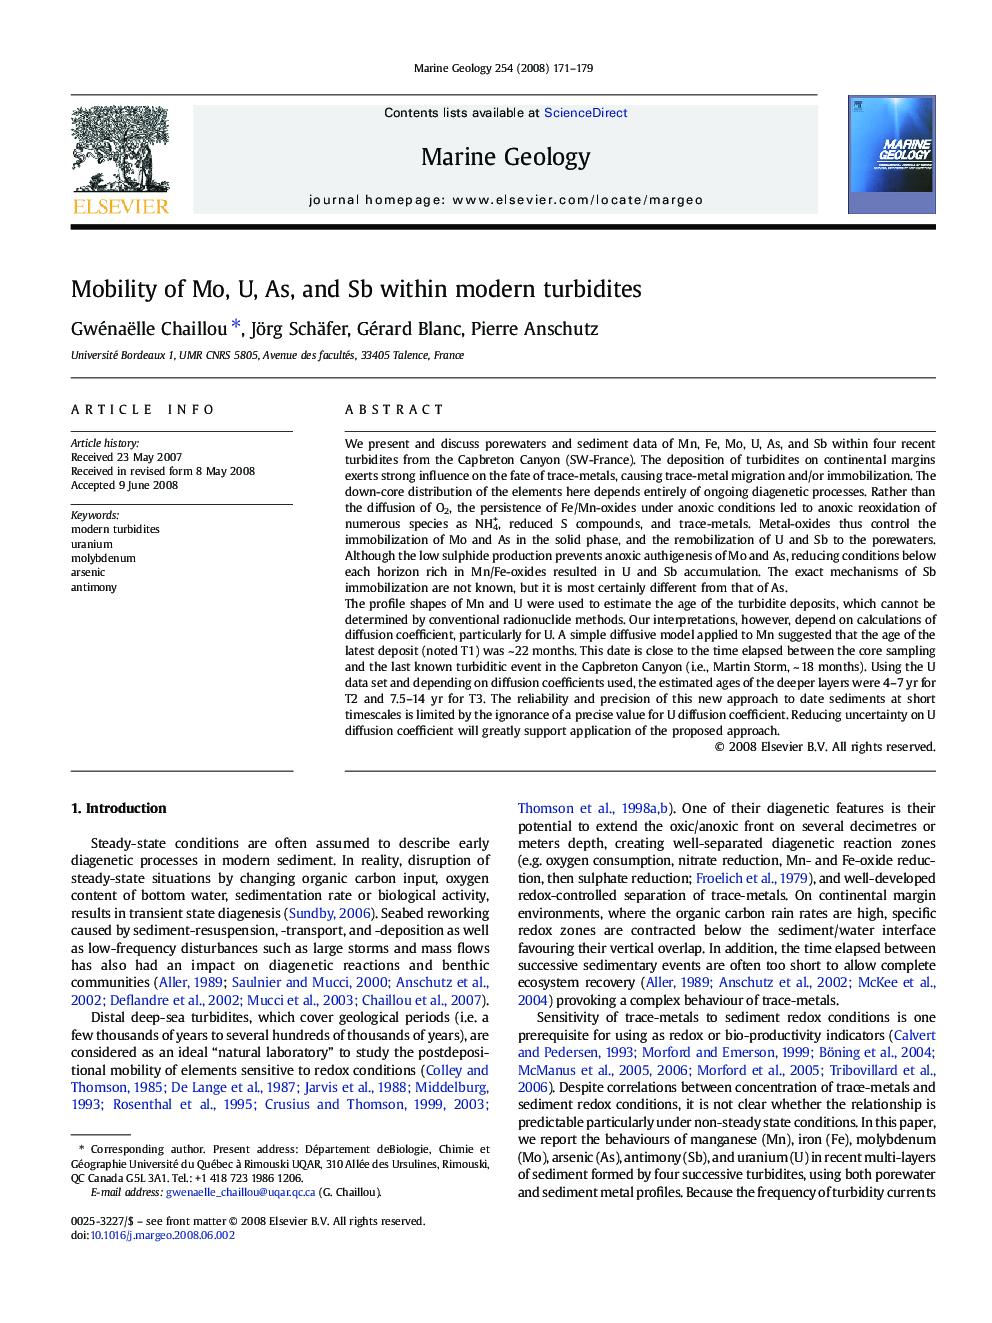 Mobility of Mo, U, As, and Sb within modern turbidites